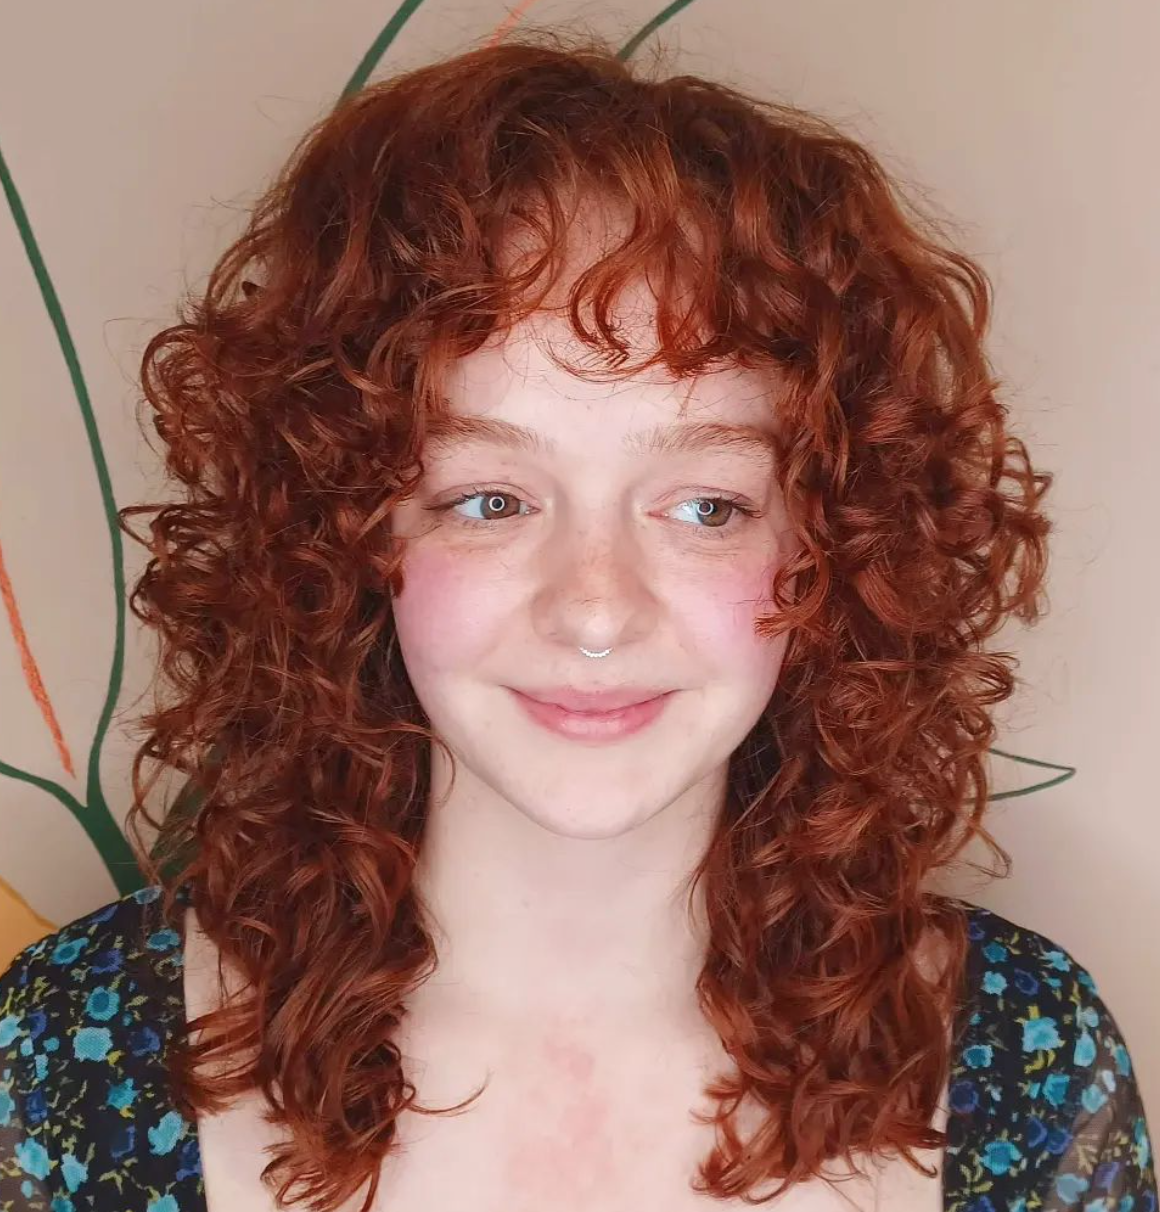 A smiling woman with curly red hair and a nose ring rocks a wolf cut.